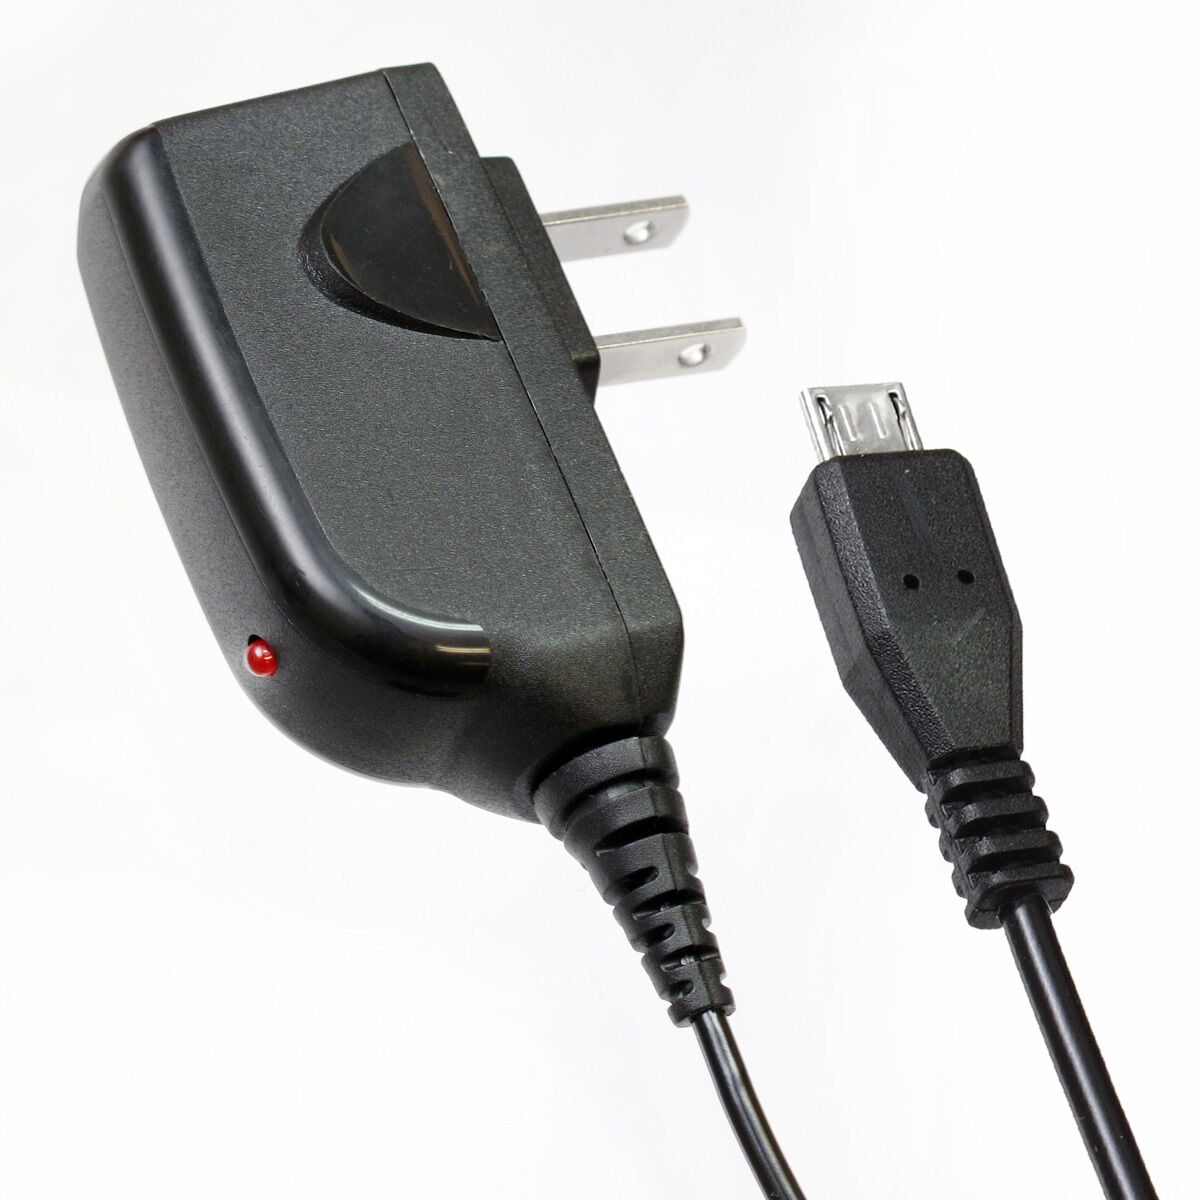 Charger for Polaroid ZIP Mobile Printer AC/DC Adapter Power Supply Cord 